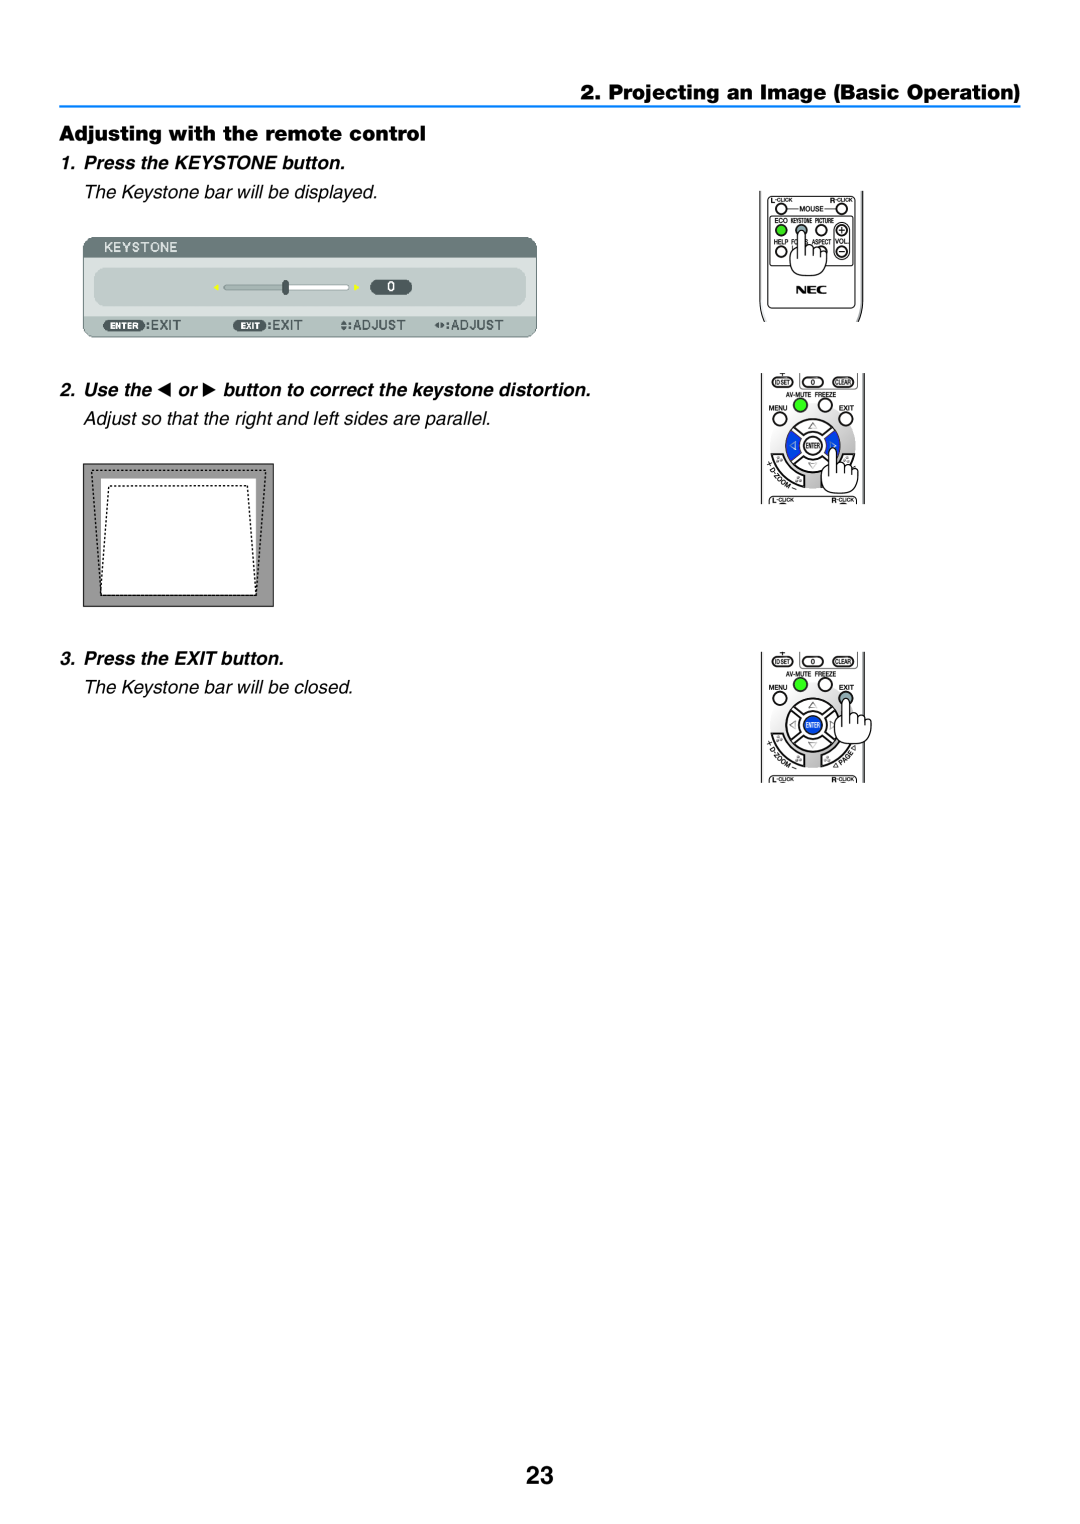 NEC NP-P350W, NP-P420X Adjusting with the remote control, Projecting an Image Basic Operation, Press the KEYSTONE button 